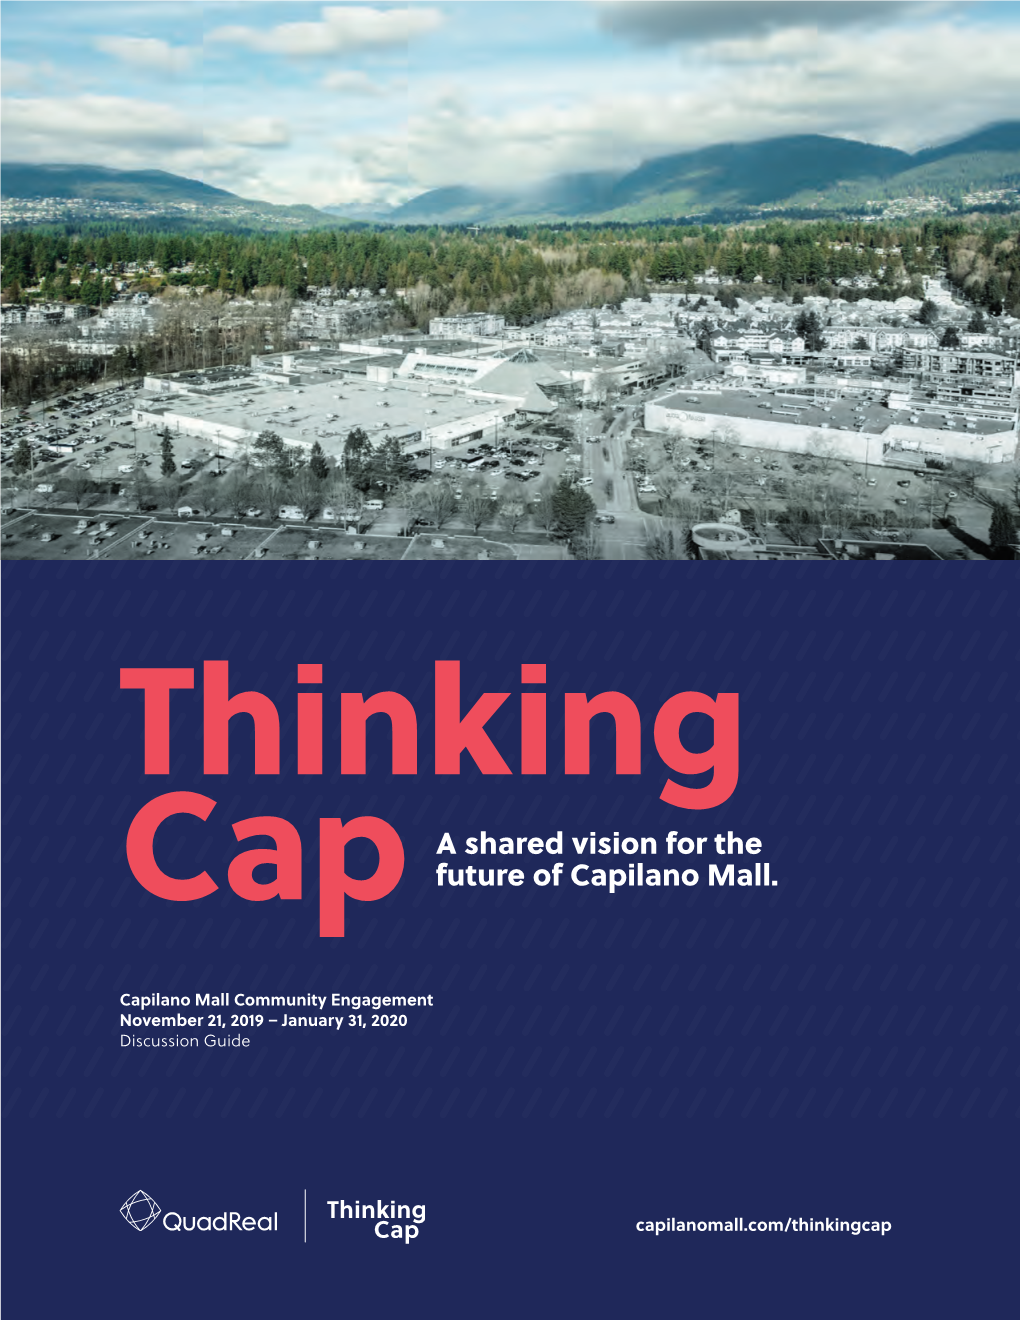 Thinking Cap Community Engagement Discussion Guide